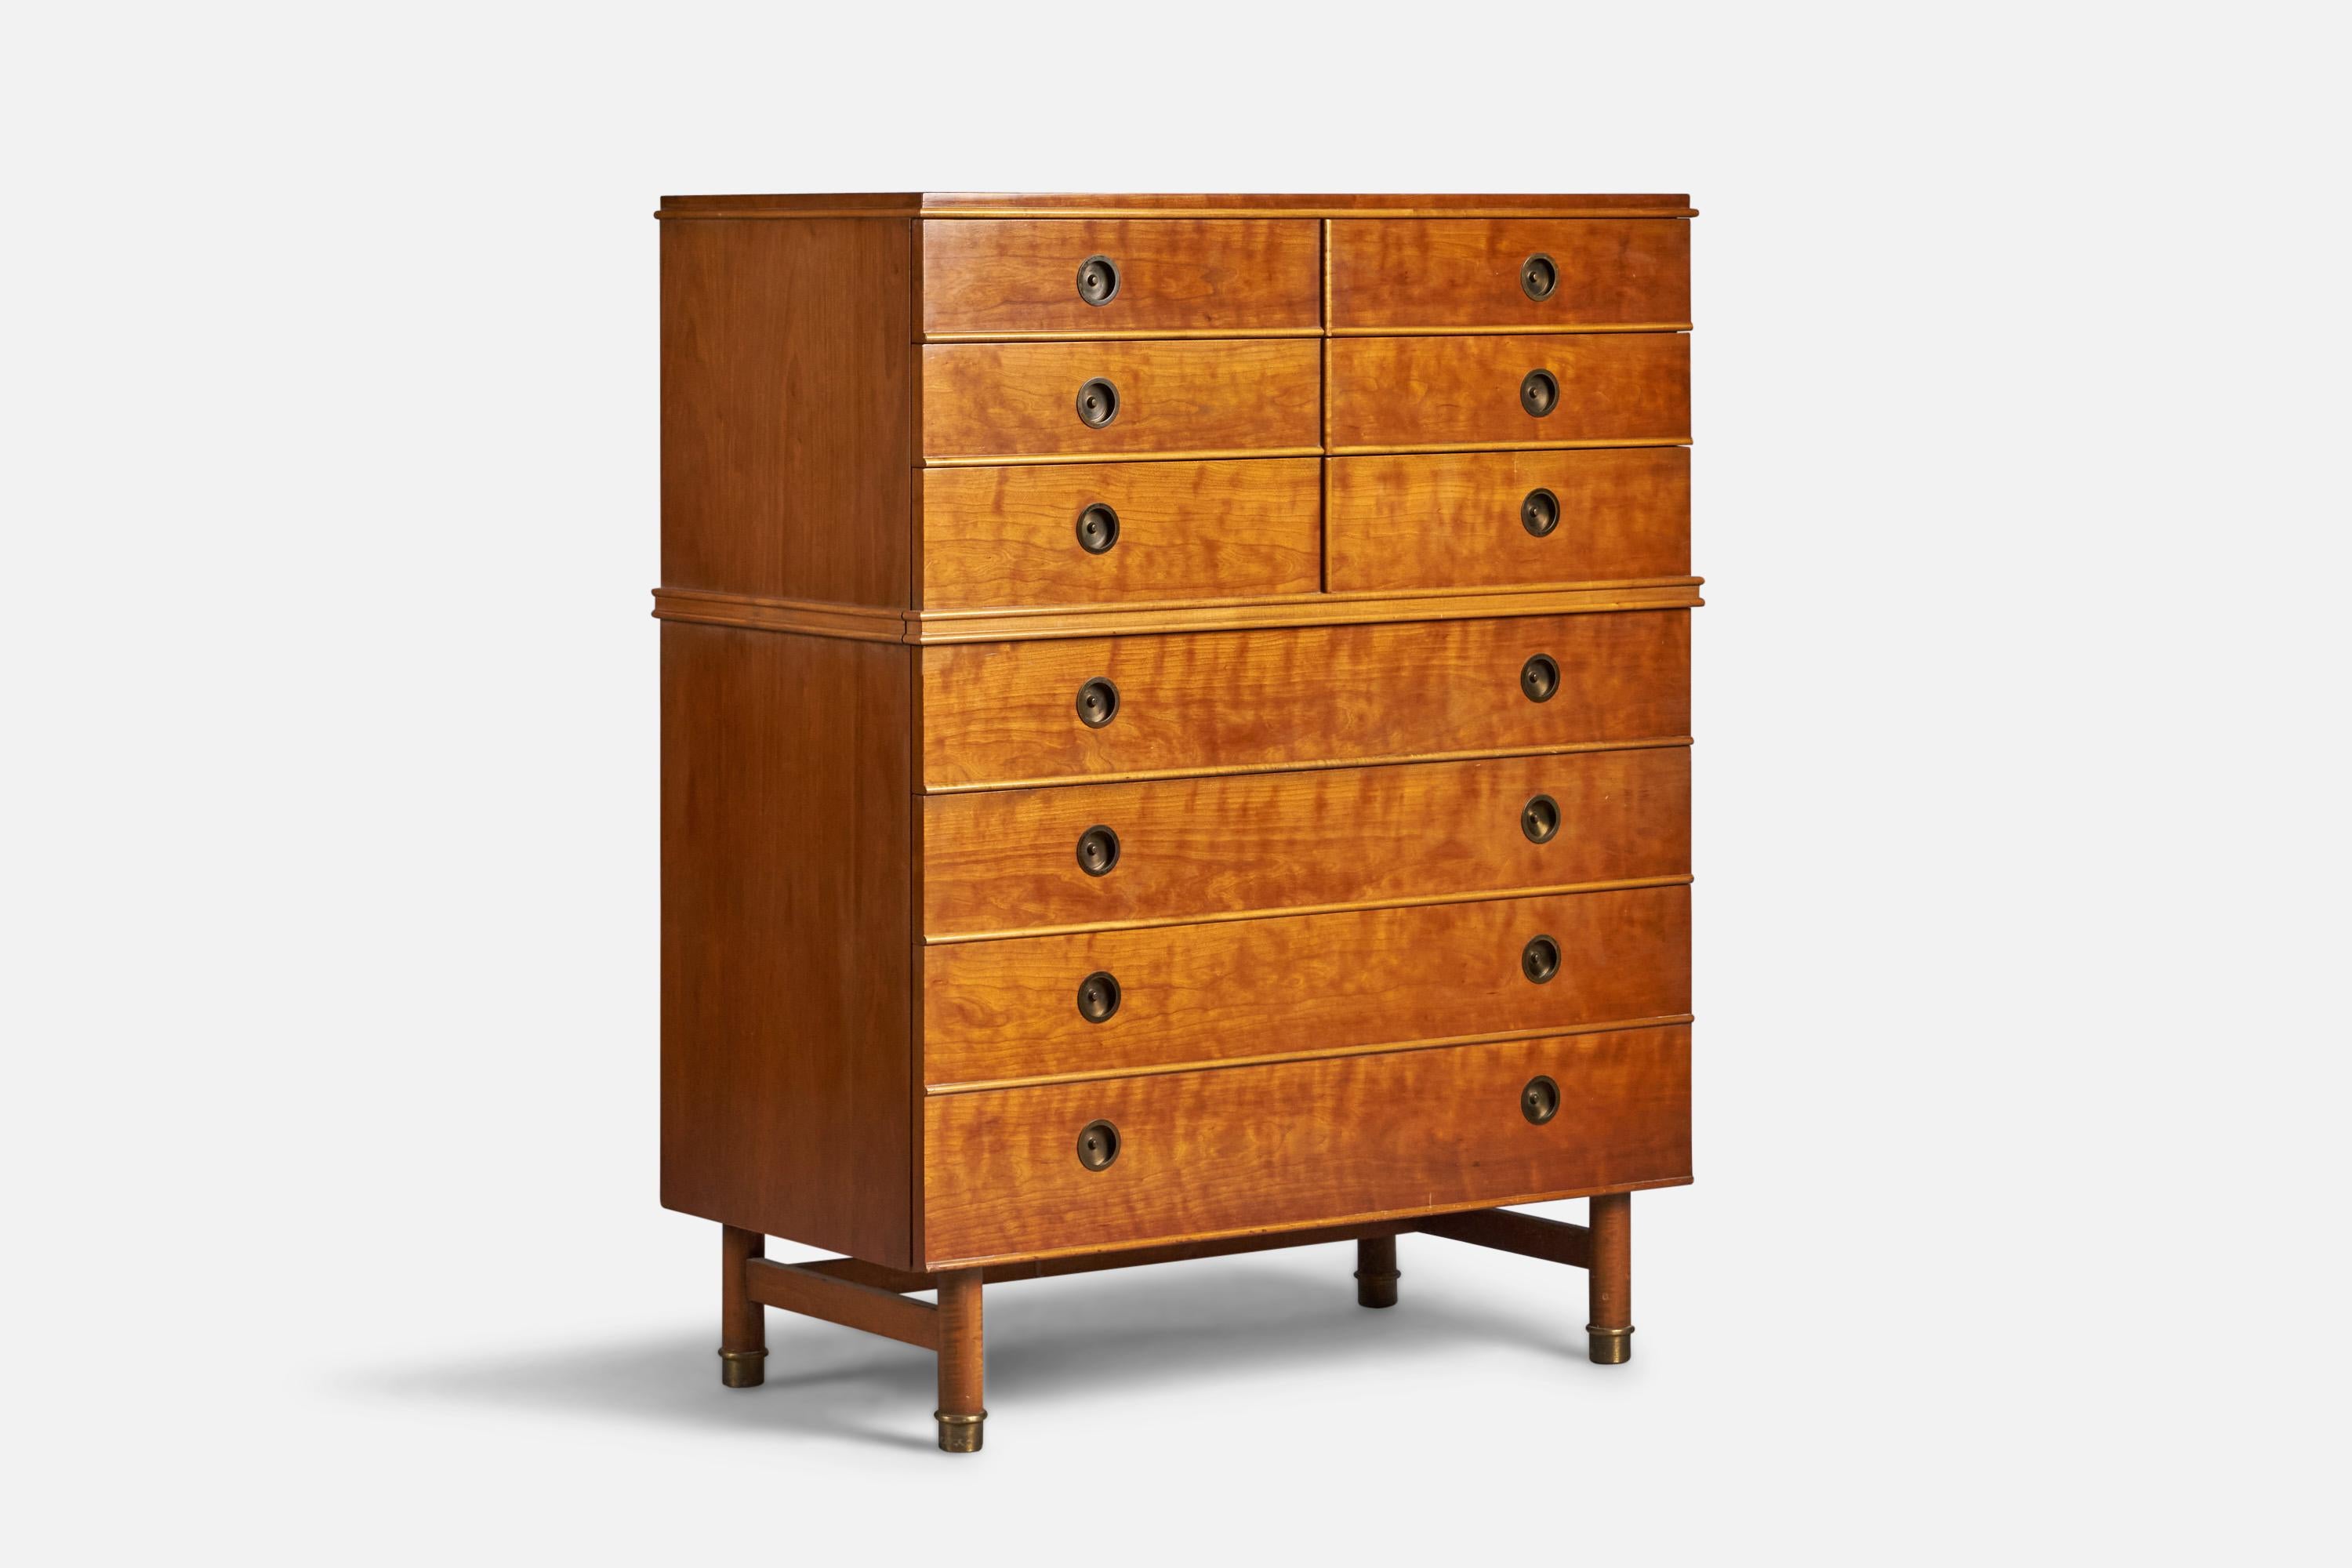 A mahogany, brass and maple chest of drawers produced by Johnson Furniture Company USA, c. 1950s. Design attributed to Renzo Rutili.